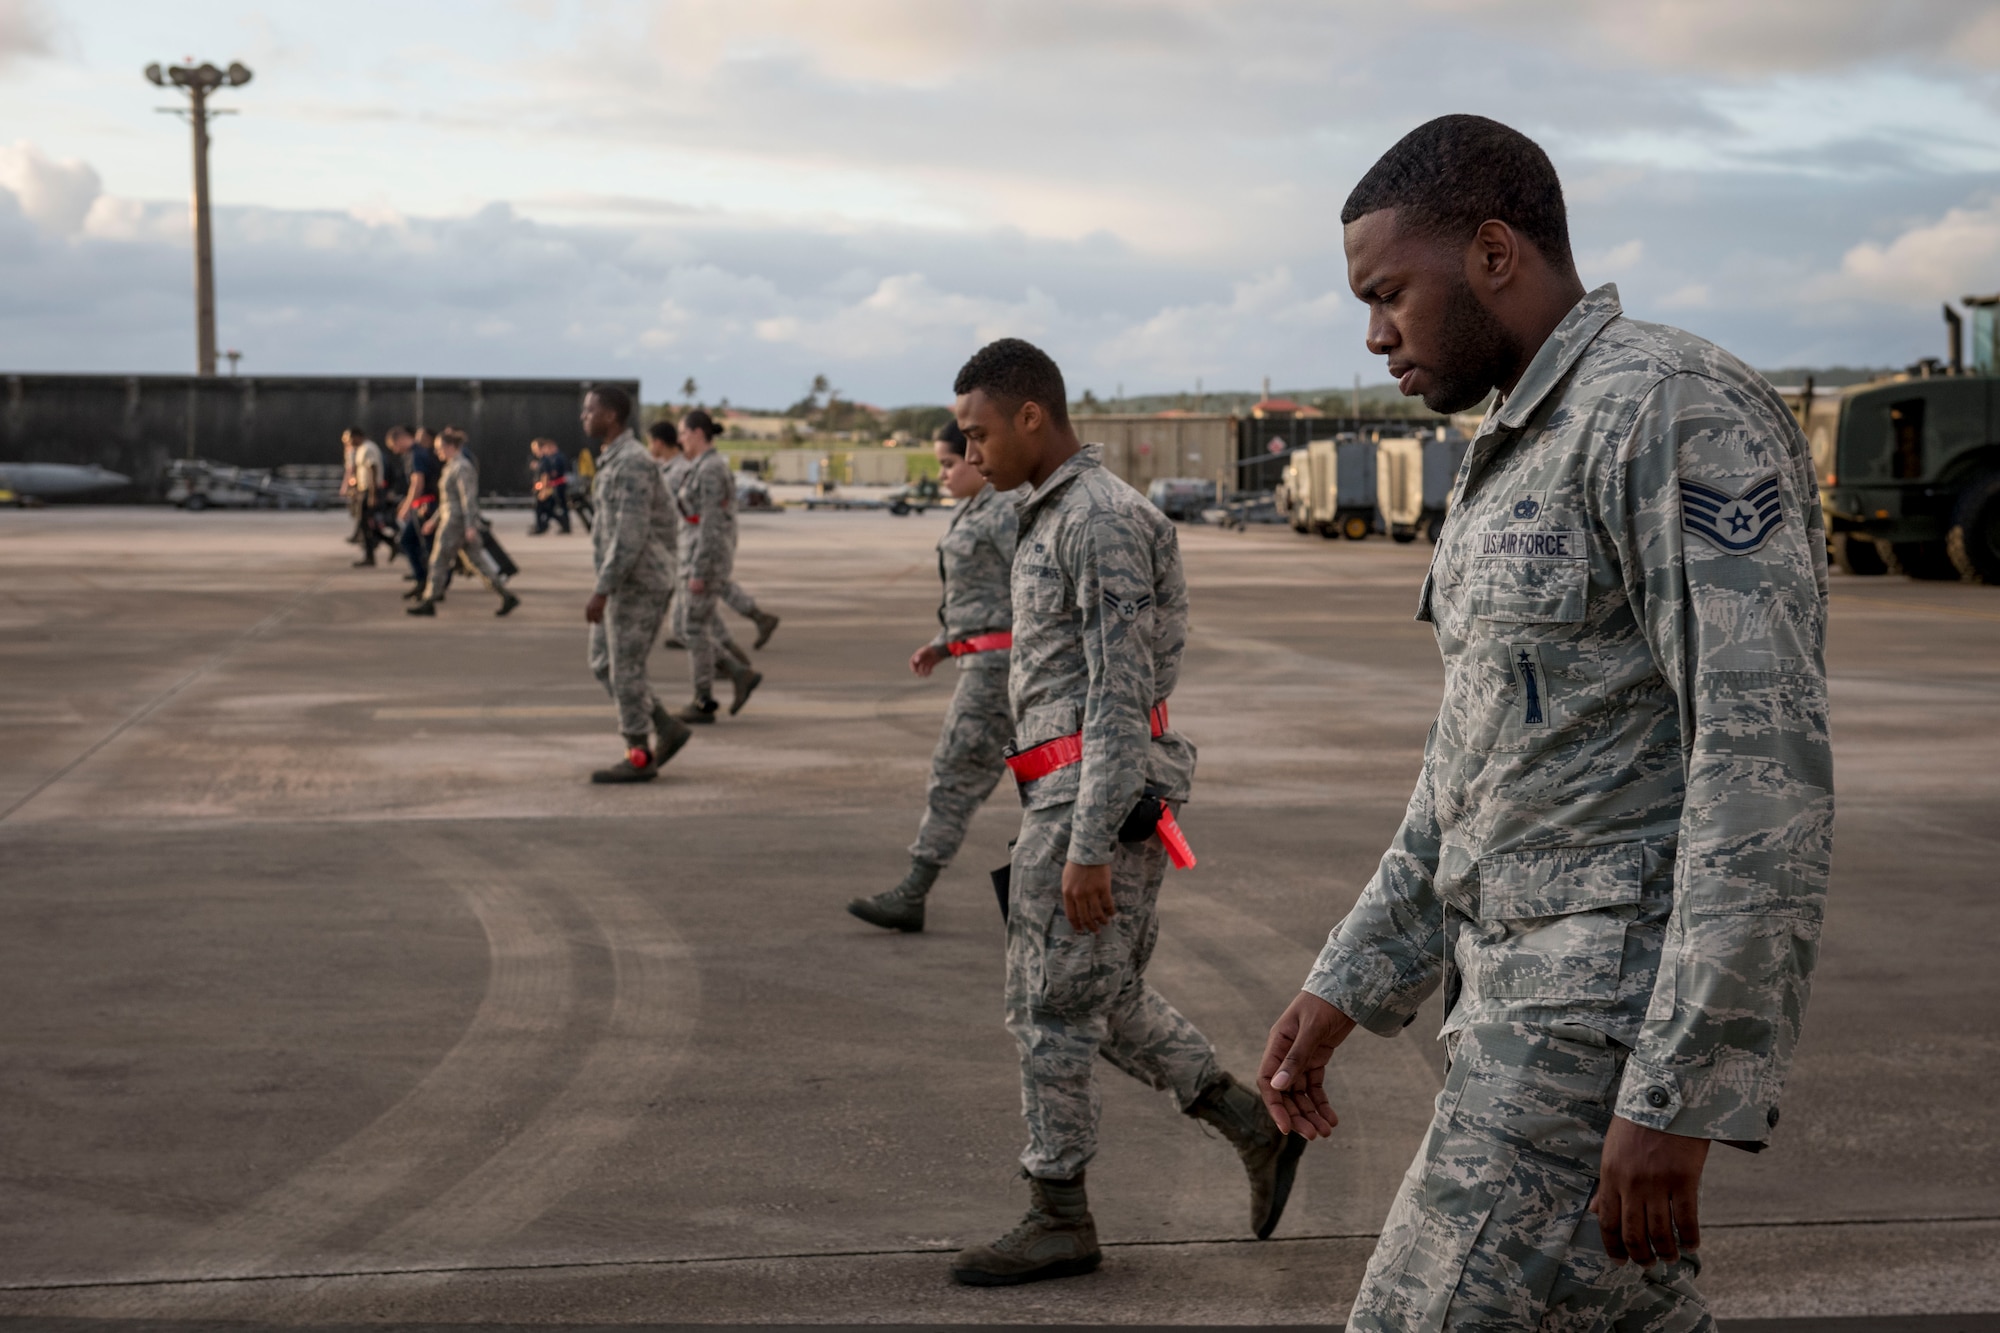 U.S. Air Force weapons Airmen from the 67th Aircraft Maintenance Squadron conduct a foreign object debris walk Feb, 23, 2017 on the flightline of Andersen Air Force Base, Guam. The 67th AMU is participating in annual exercise Cope North to increase interoperability between the U.S., Royal Australian Air Force and Japan Air Self-Defense Force. (U.S. Air Force photo by Senior Airman John Linzmeier)